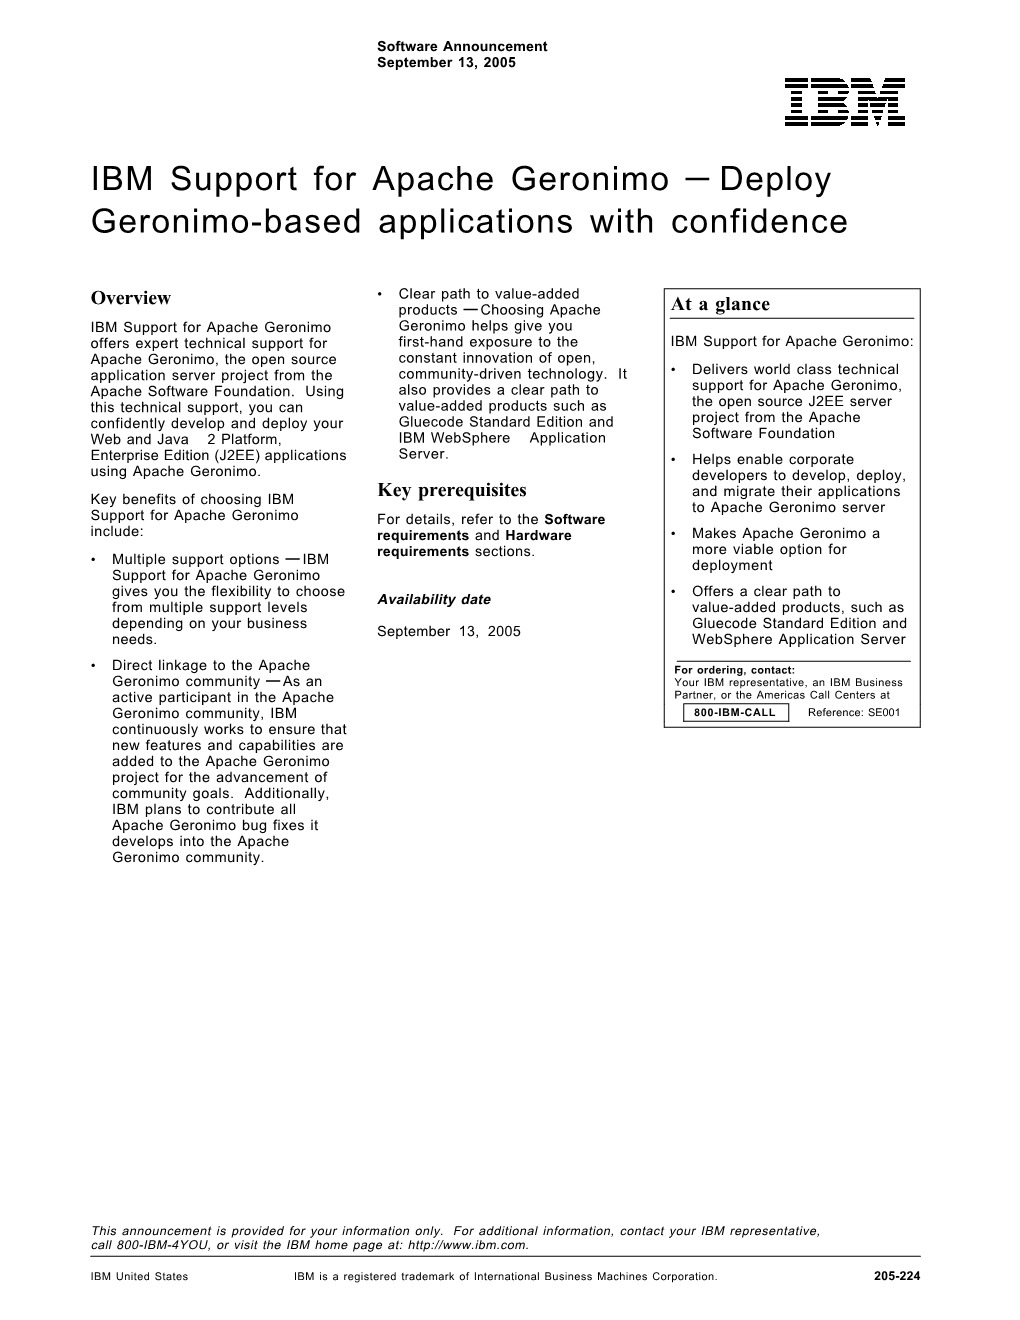 IBM Support for Apache Geronimo — Deploy Geronimo-Based Applications with Confidence